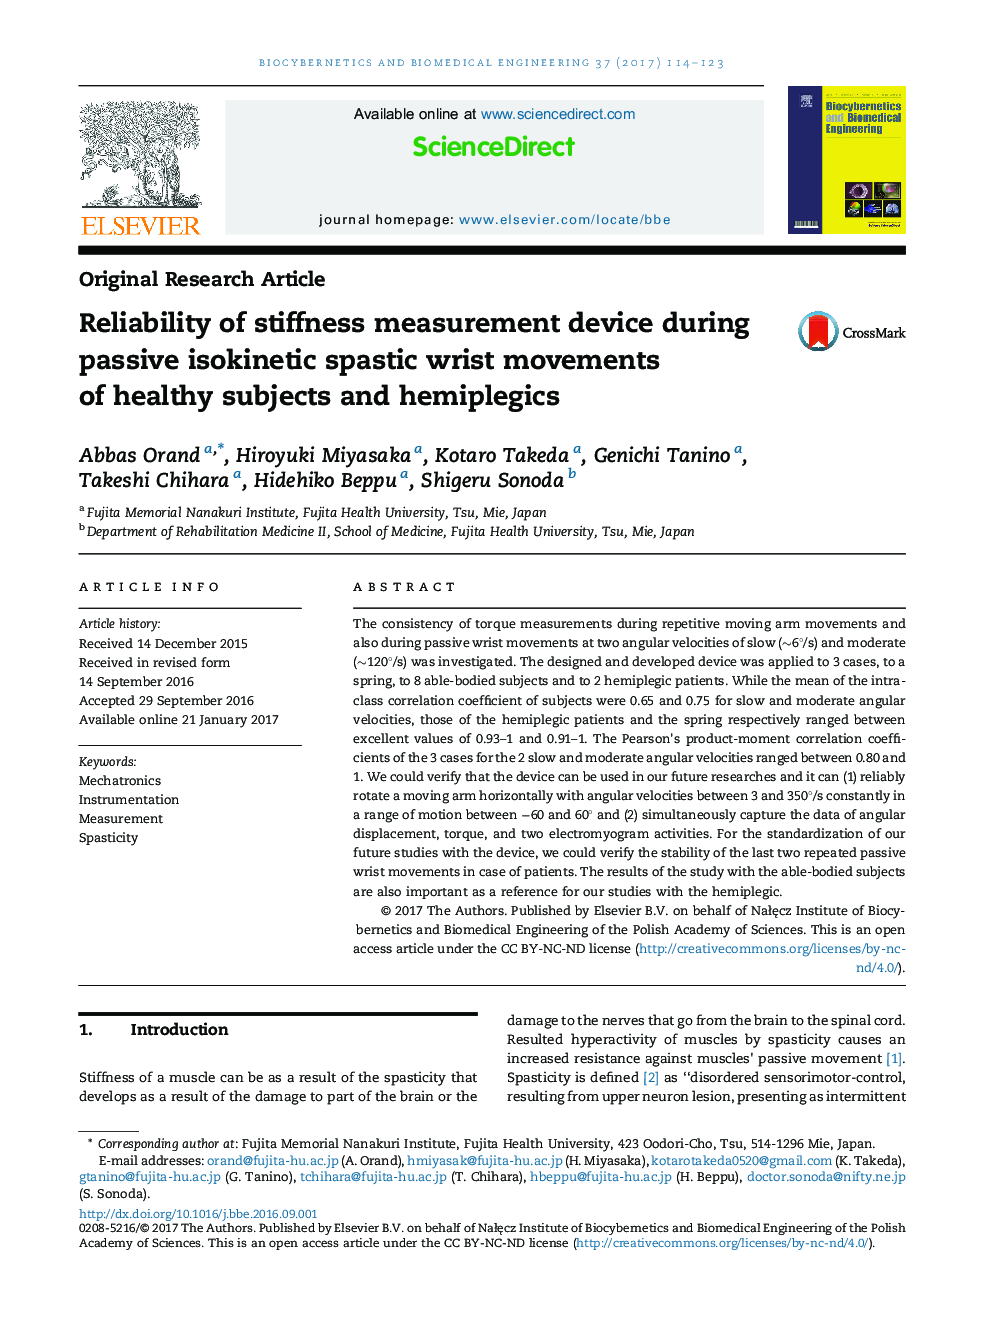 Reliability of stiffness measurement device during passive isokinetic spastic wrist movements of healthy subjects and hemiplegics